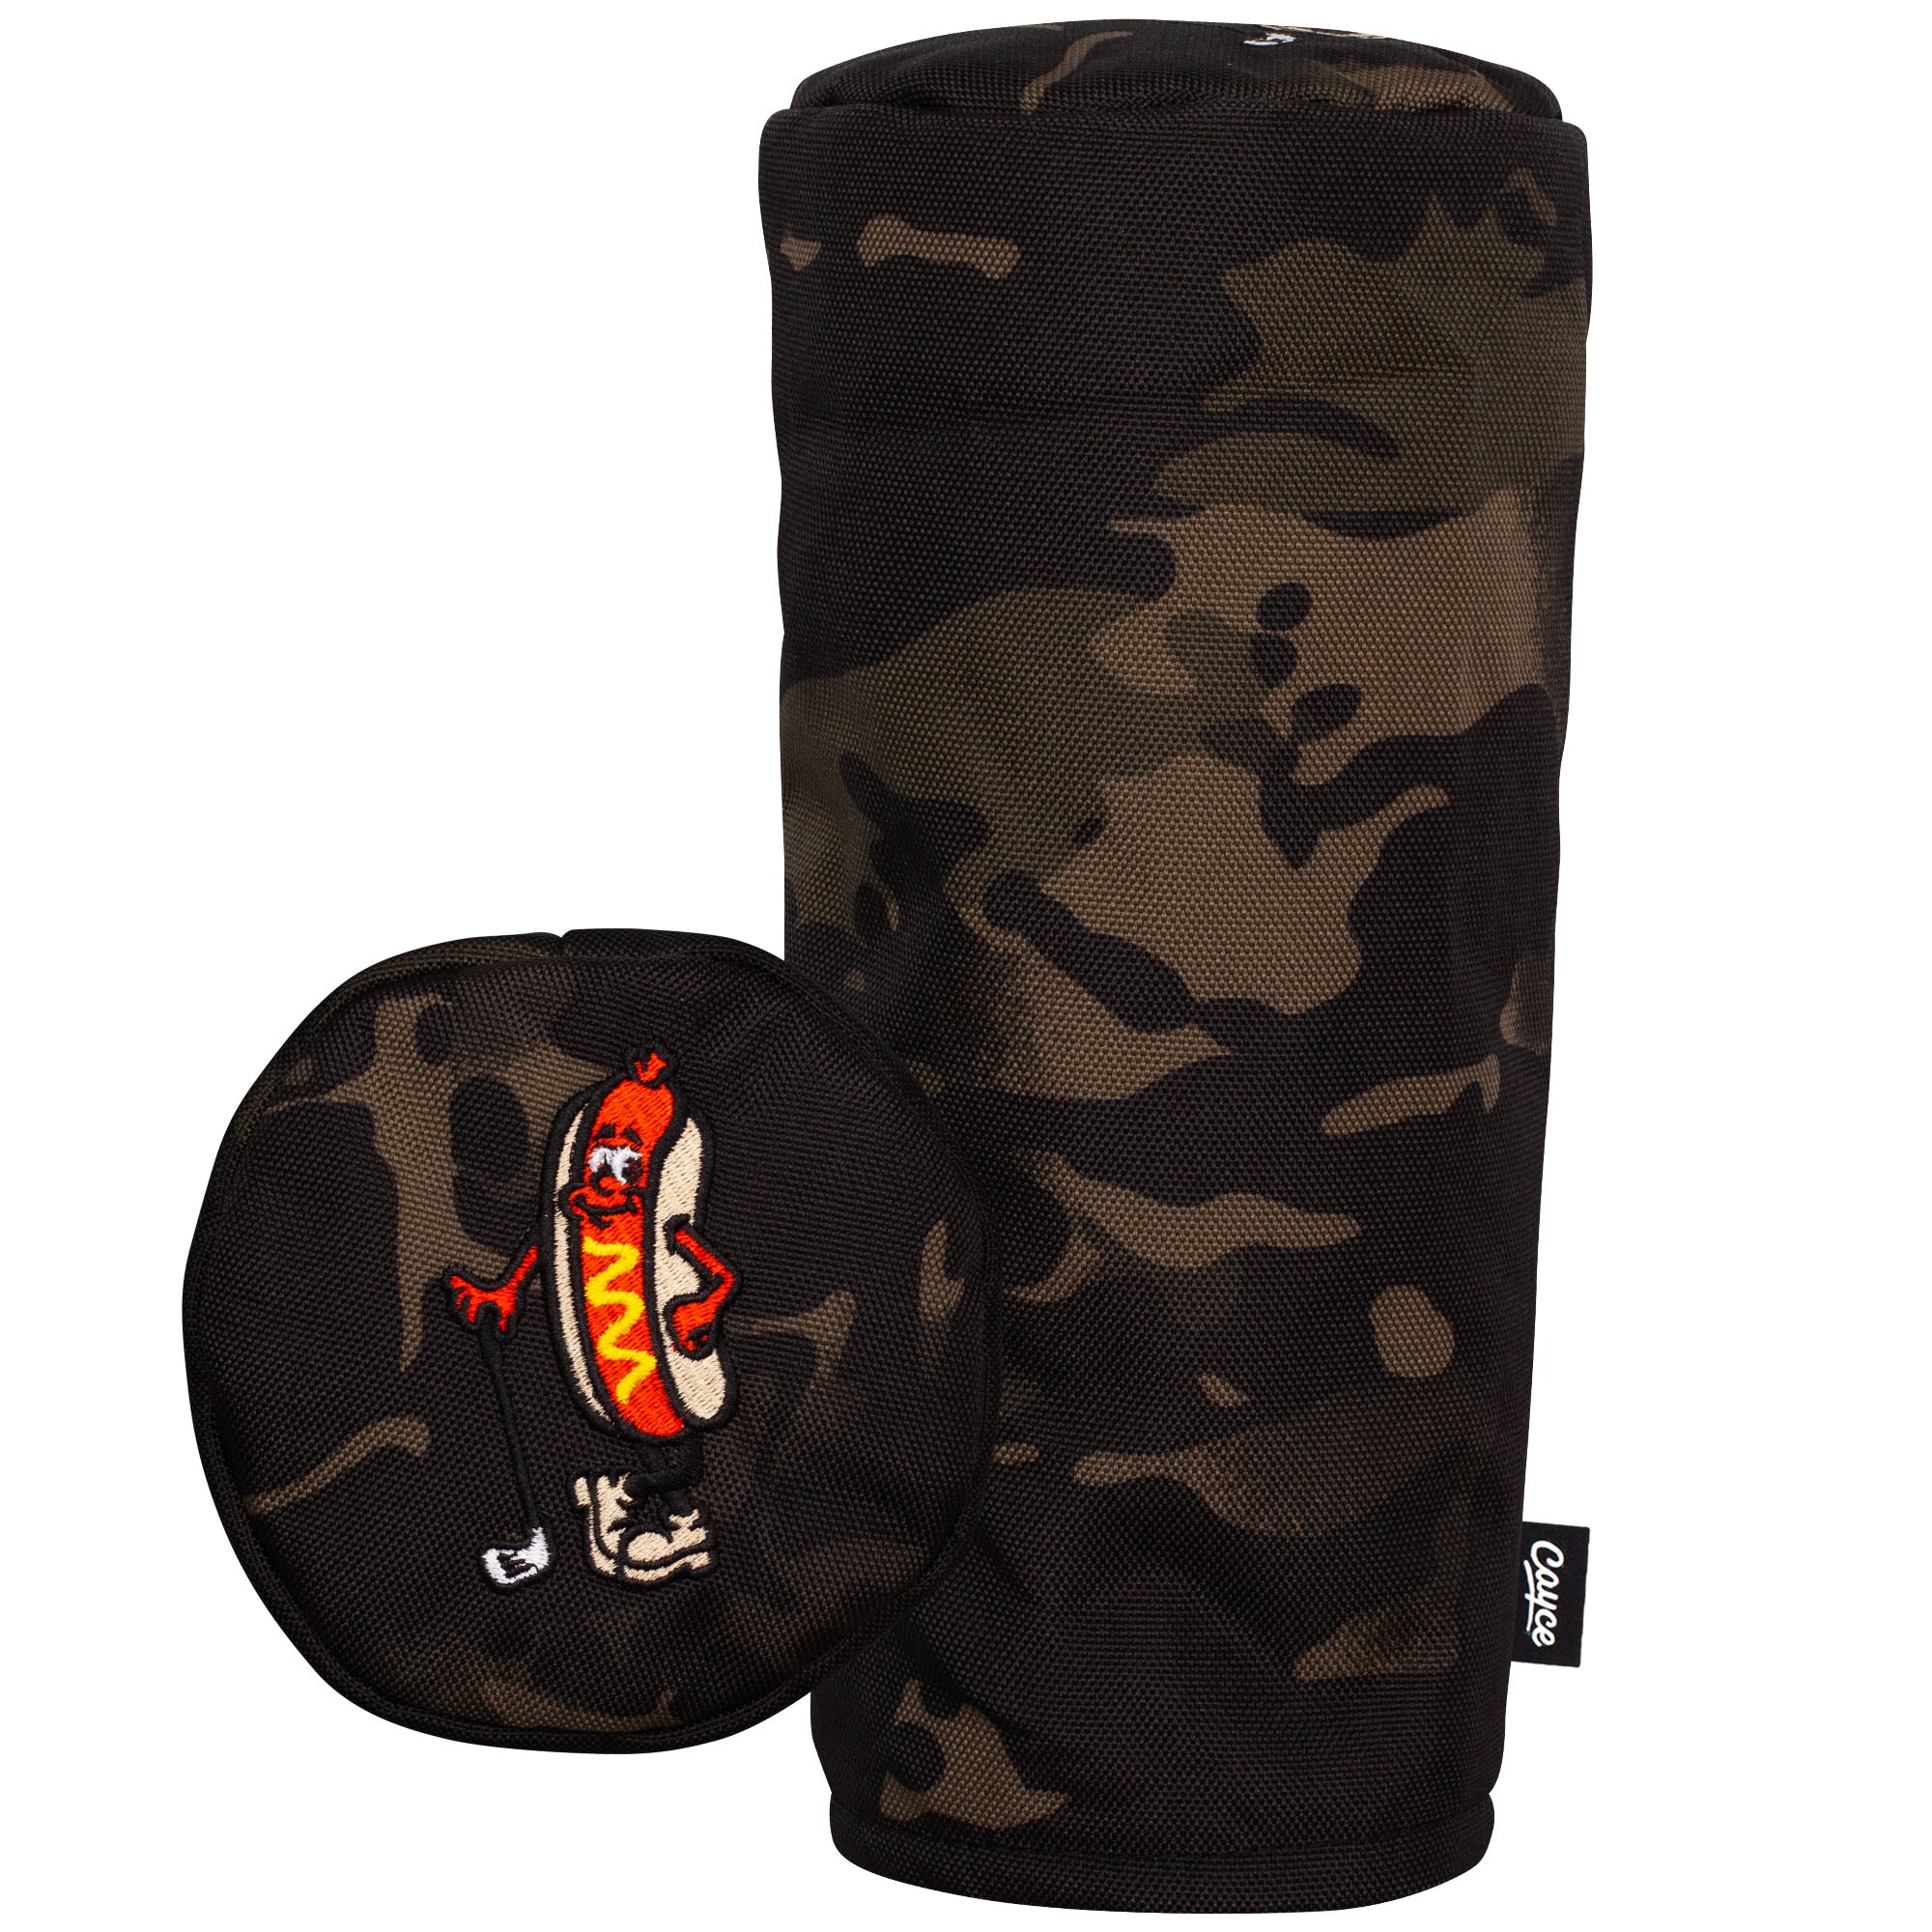 A camouflage, barrel-shaped driver club head cover with embroidered hot dog golfer on the top cap. 